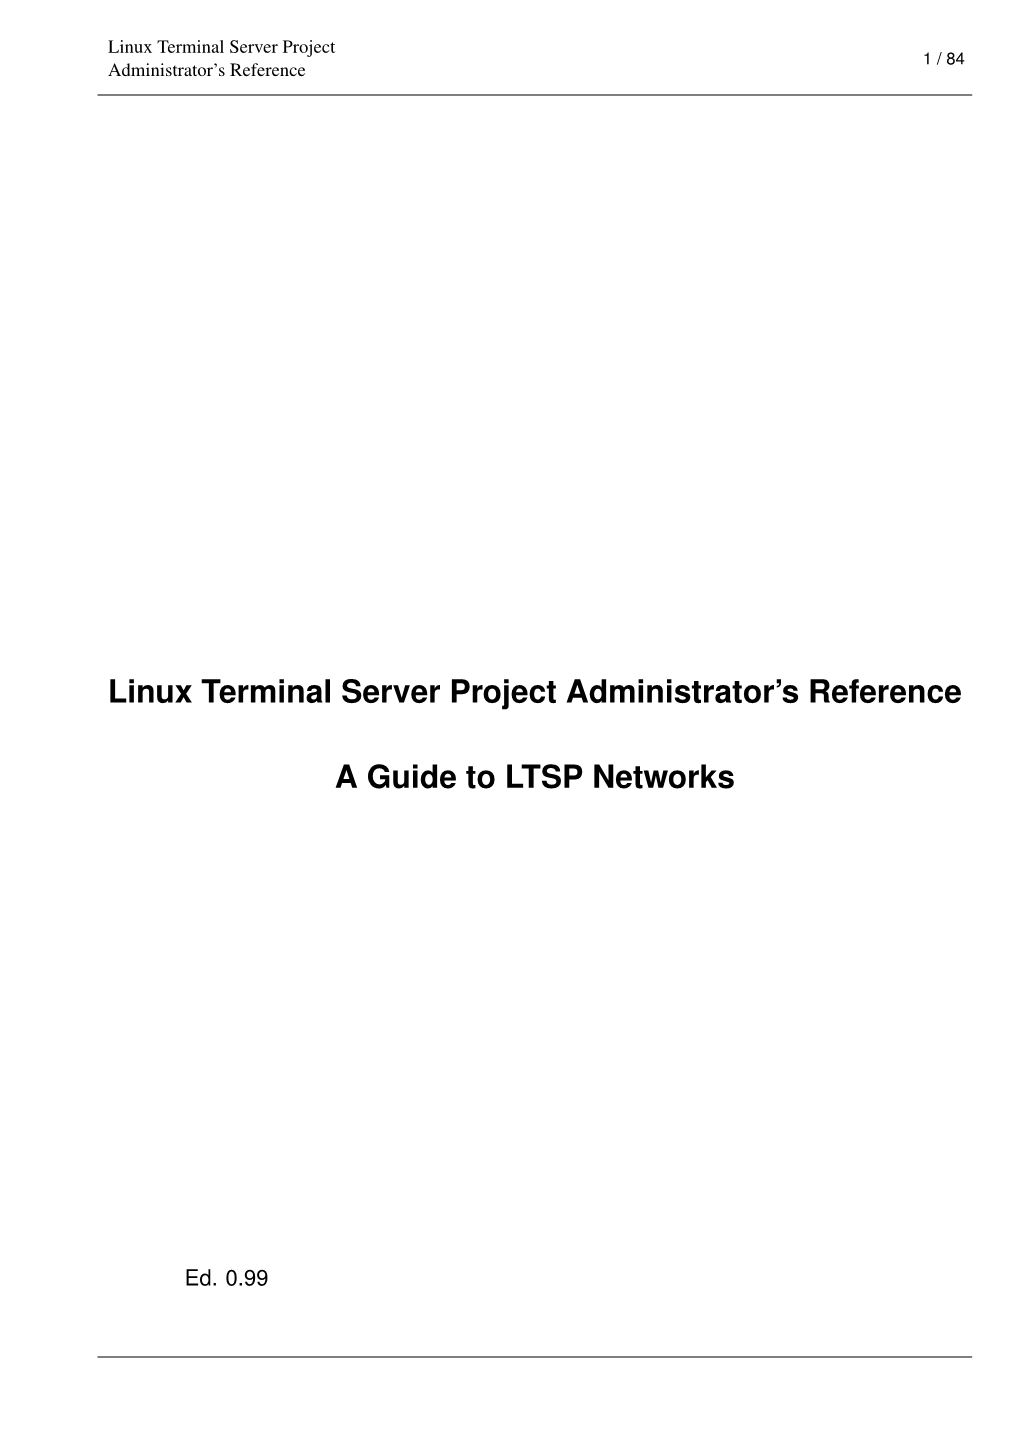 Linux Terminal Server Project Administrator's Reference a Guide